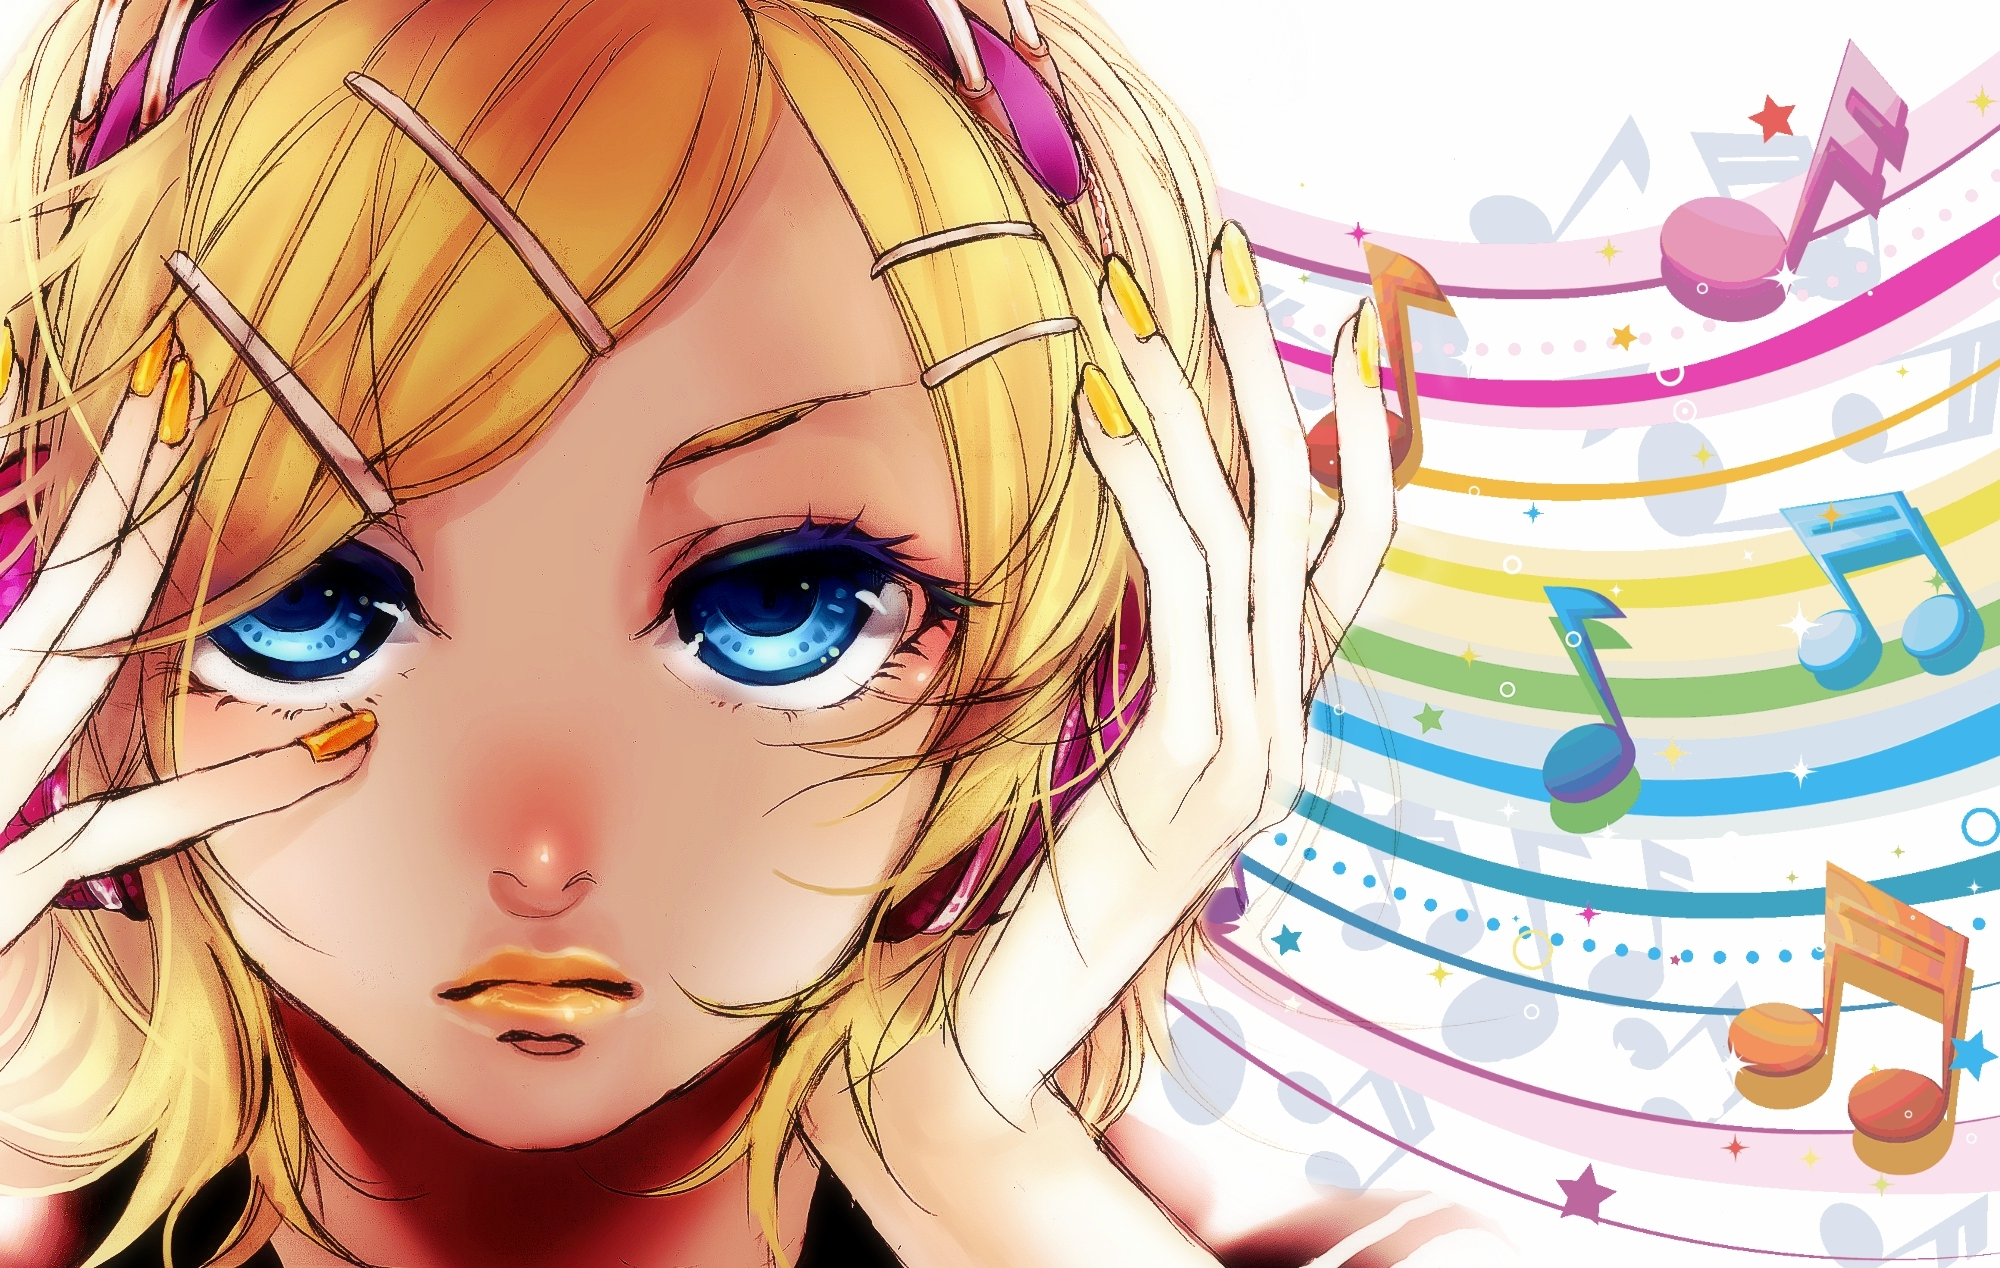 2000x1268 1100+ Rin Kagamine HD Wallpapers and Backgrounds